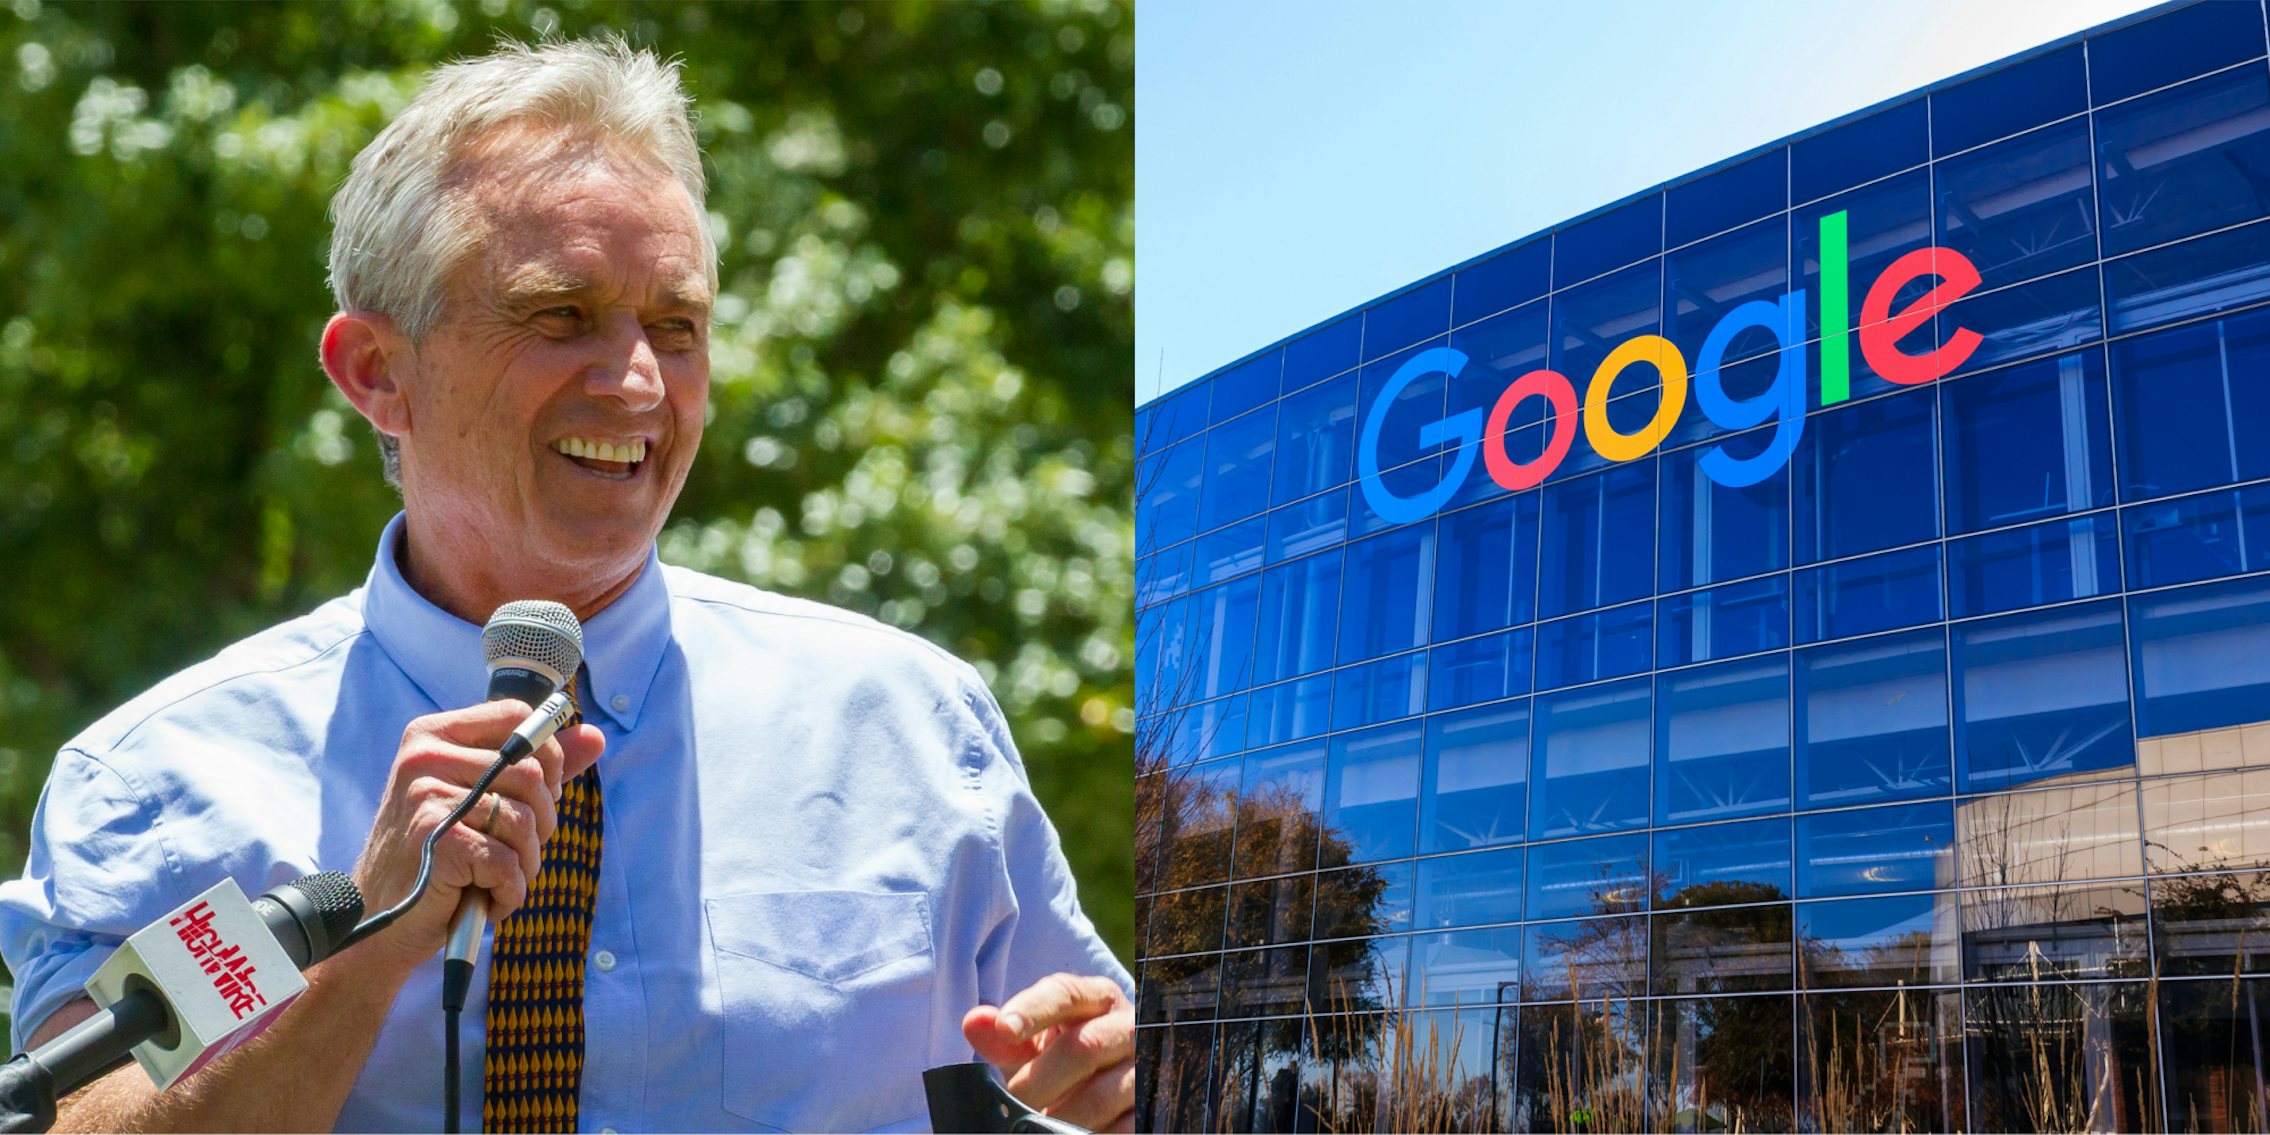 Robert F. Kennedy Jr. speaking outside into microphone (l) Google building with sign (r)